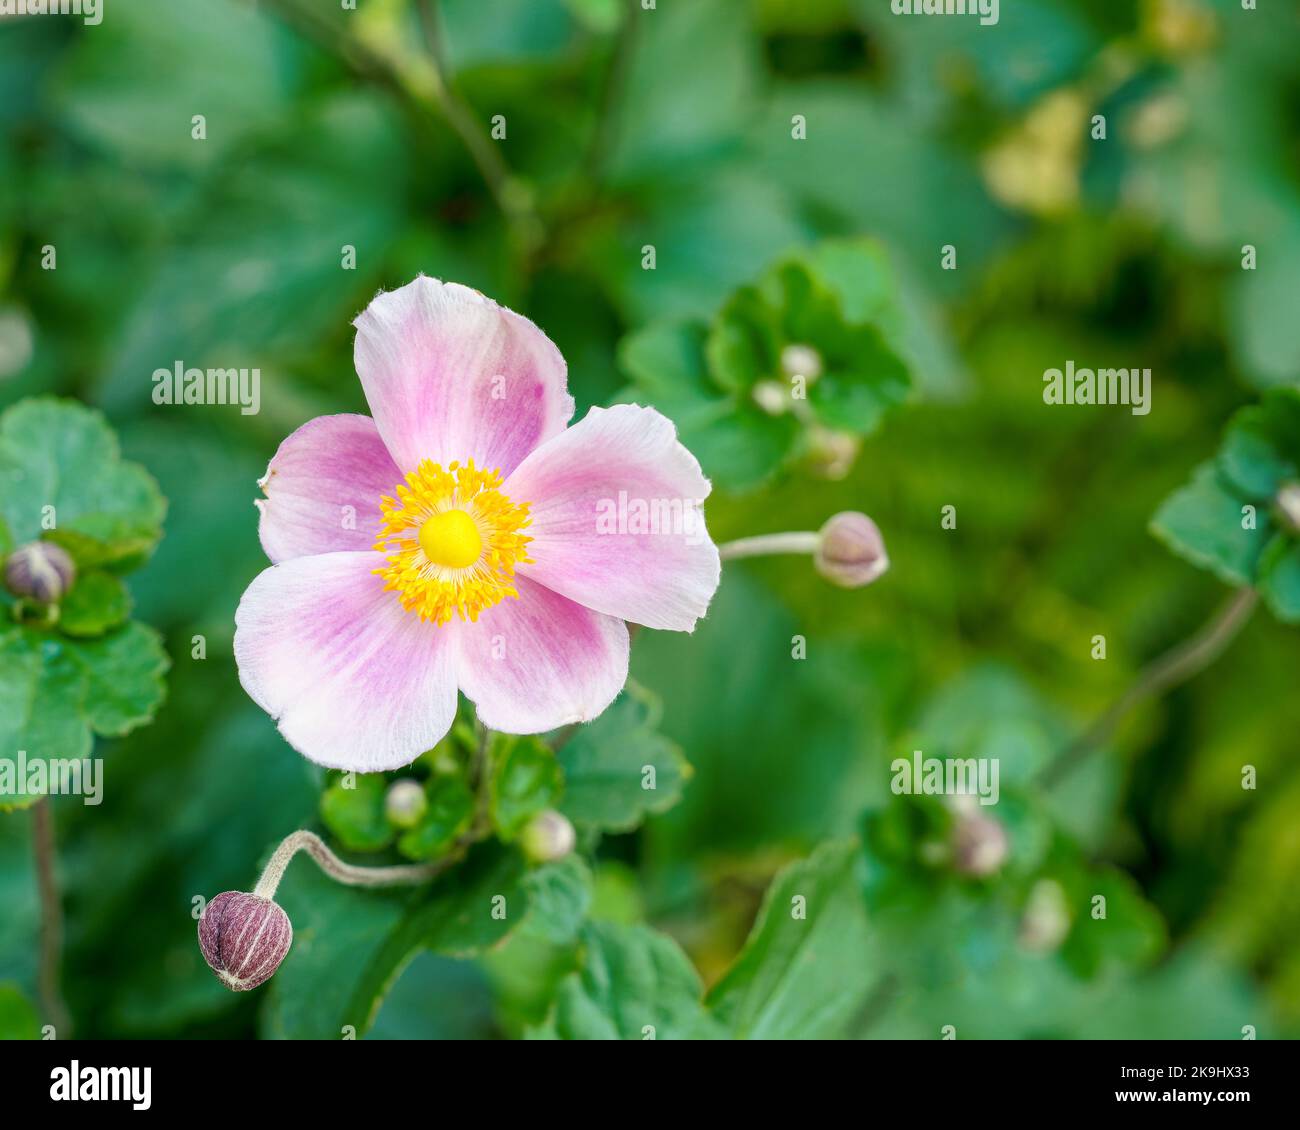 beautiful pink Anemone flower Eriocapitella tomentosa close up in a garden showing the yellow stamen and pistil Stock Photo